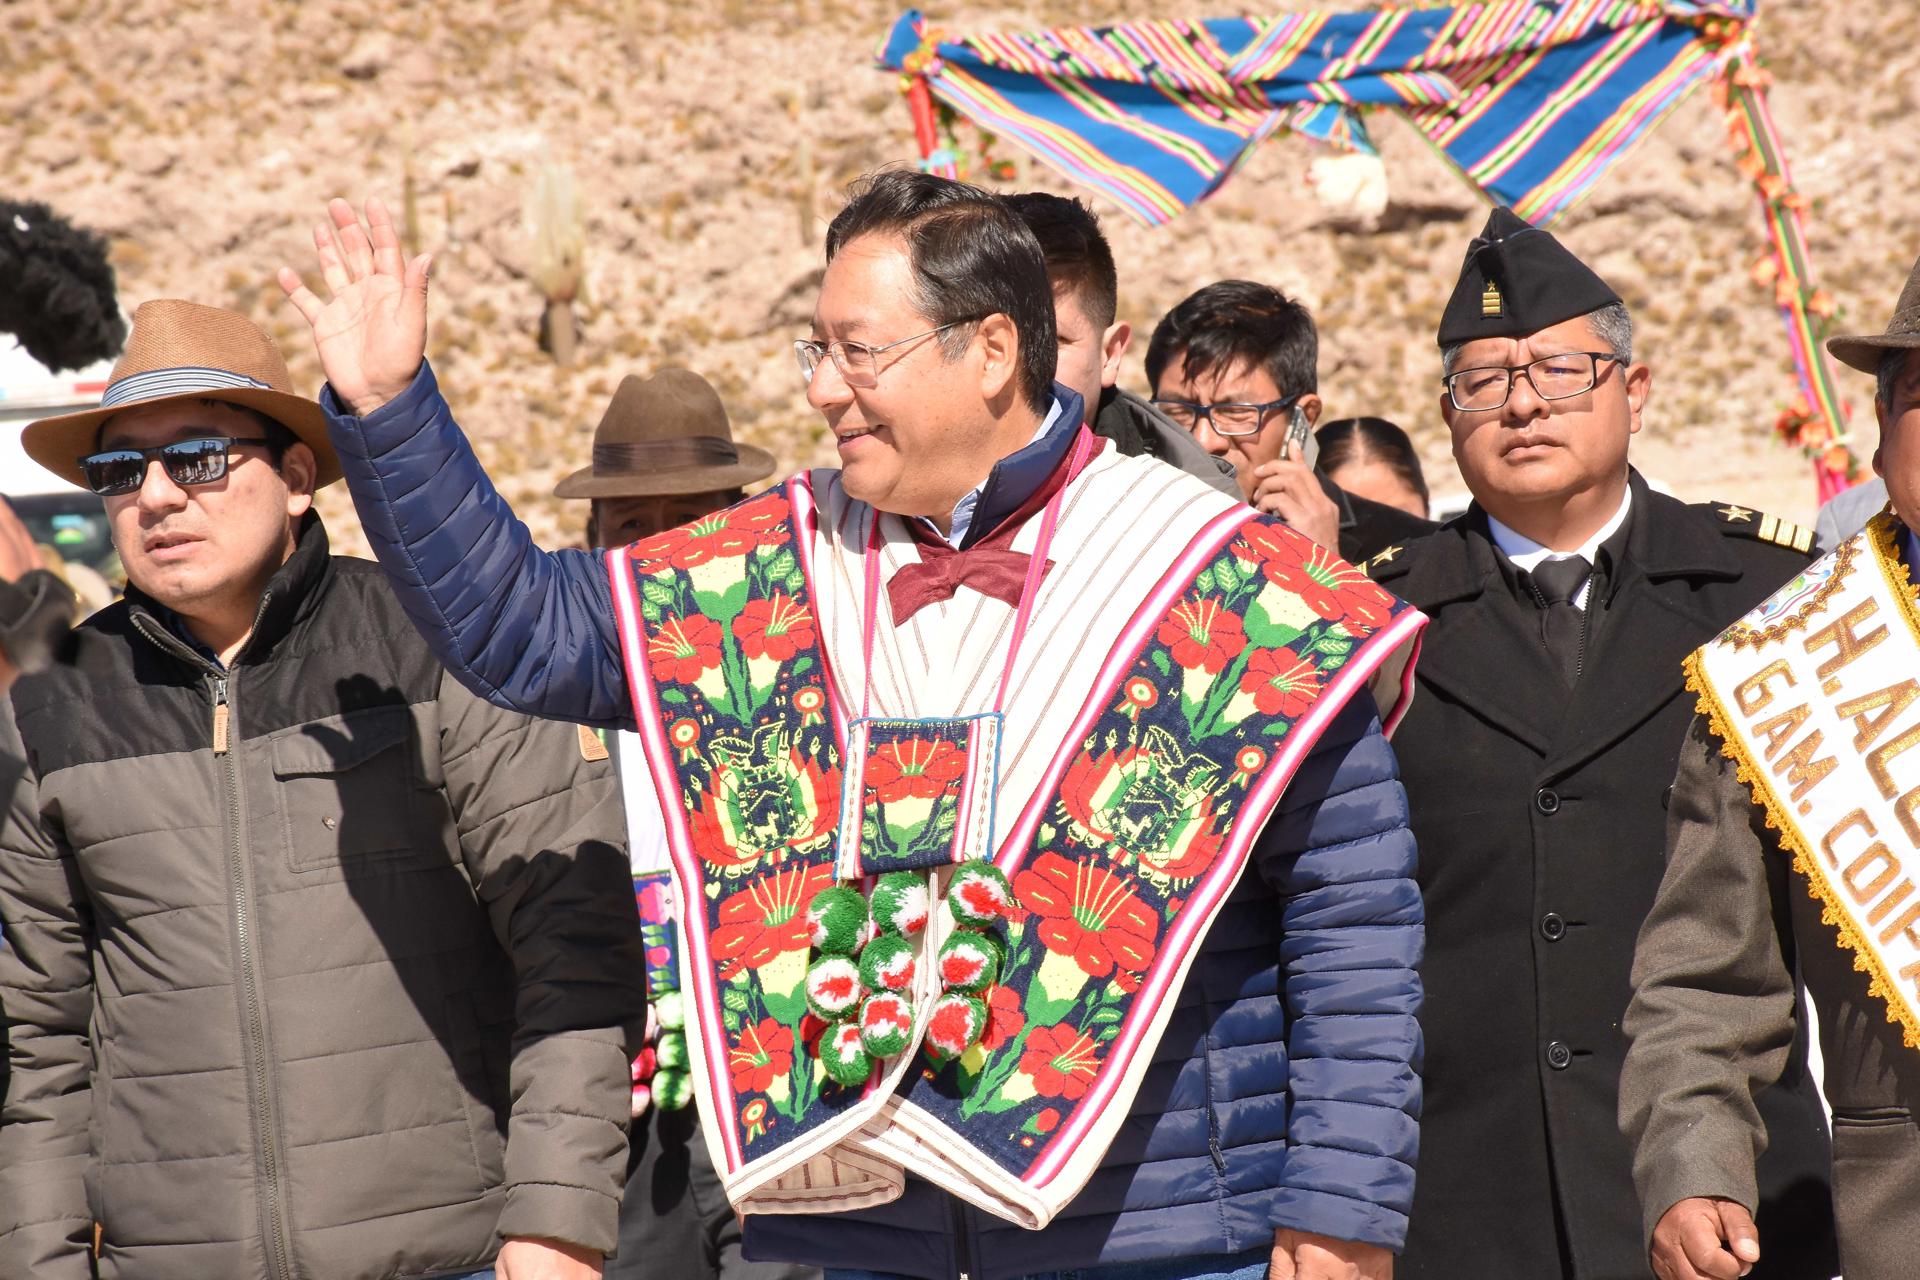 President Luis Arce takes part in an event in Coipasa, Bolivia, on 20 July 2023. EFE/Stringer